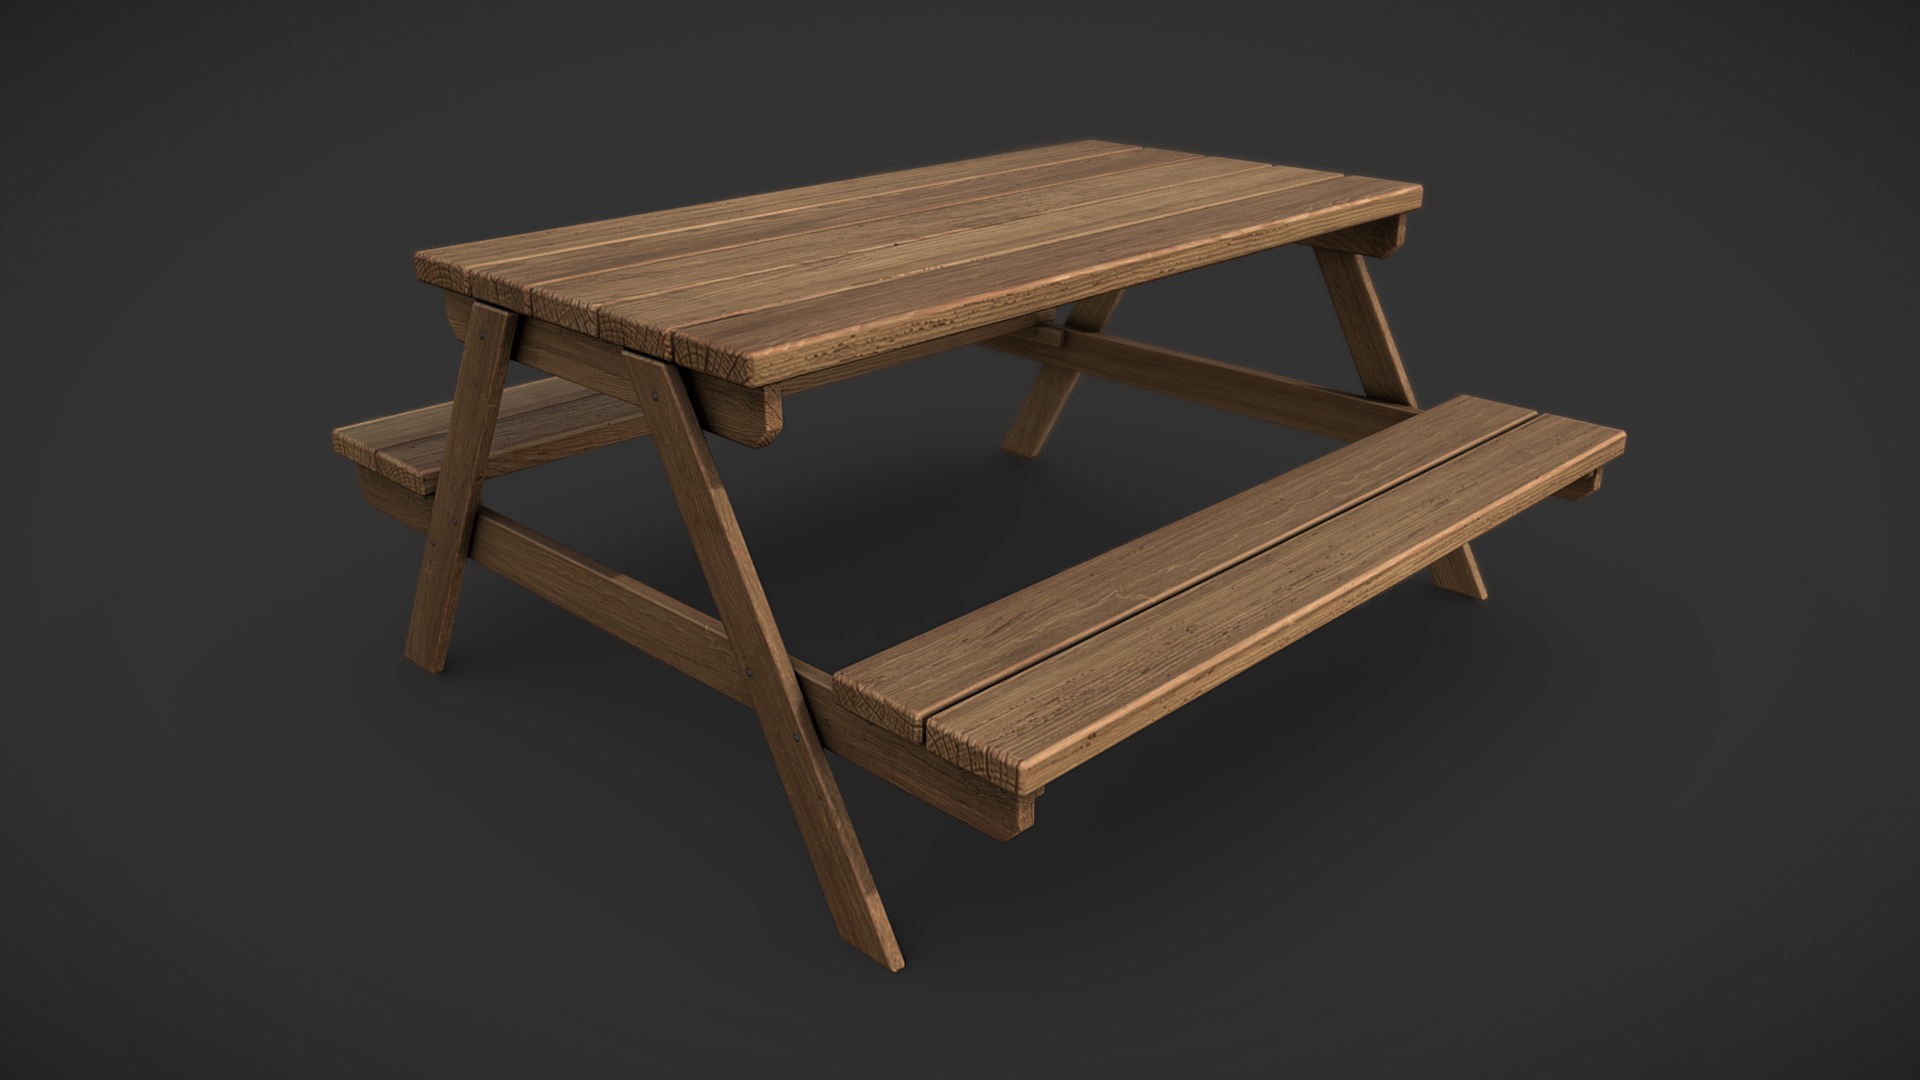 3D model Picnic Table - This is a 3D model of the Picnic Table. The 3D model is about a wooden table with legs.